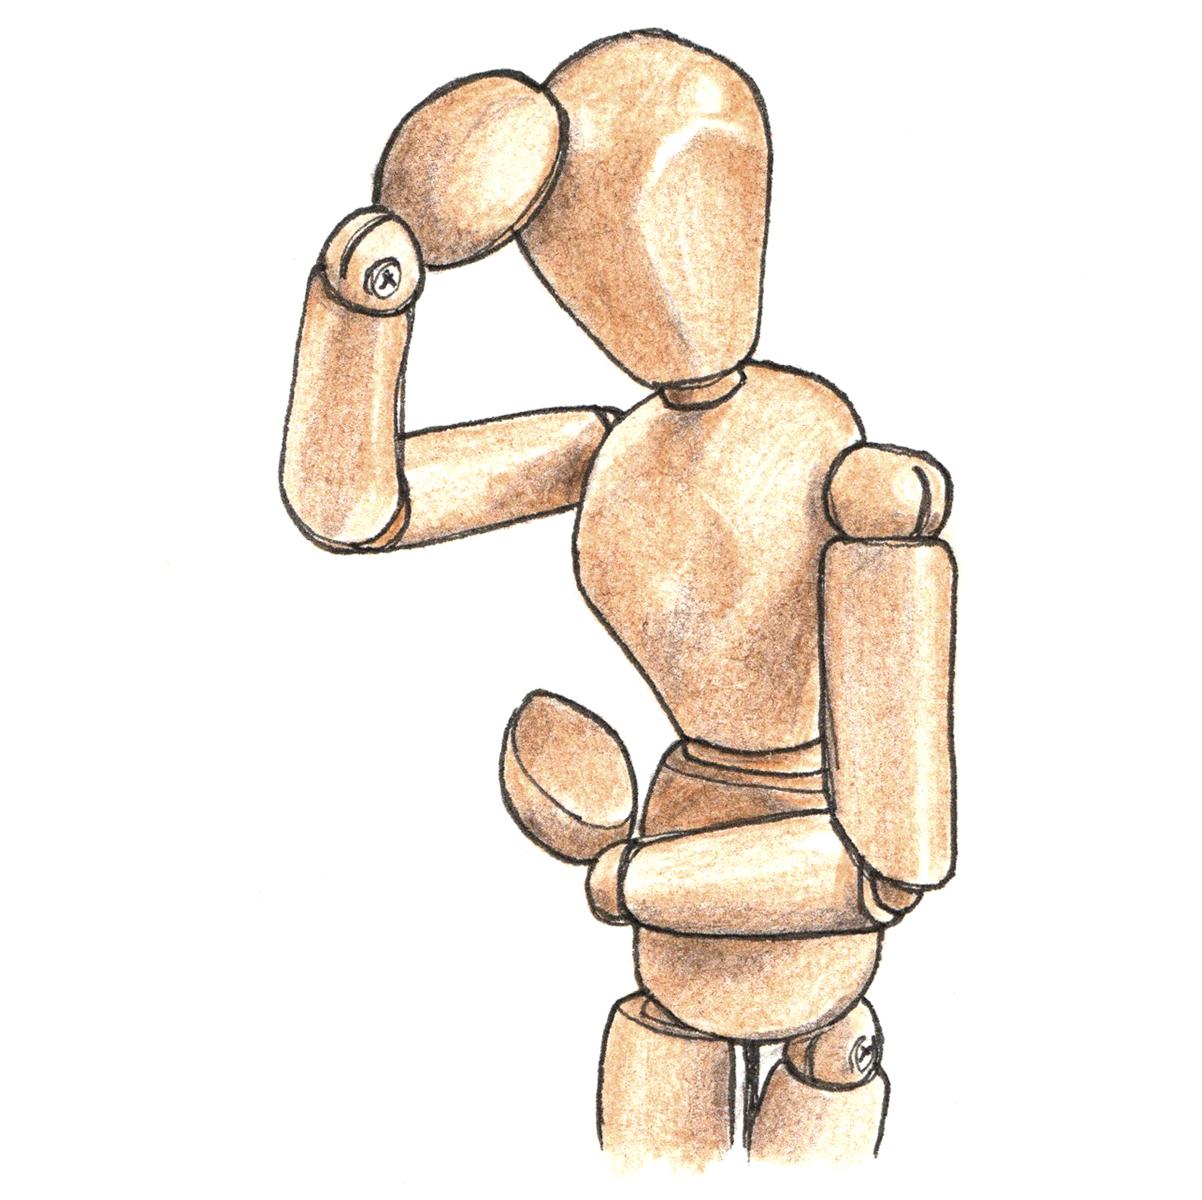 Limited edition print from pen and ink drawing of an artists' mannequin